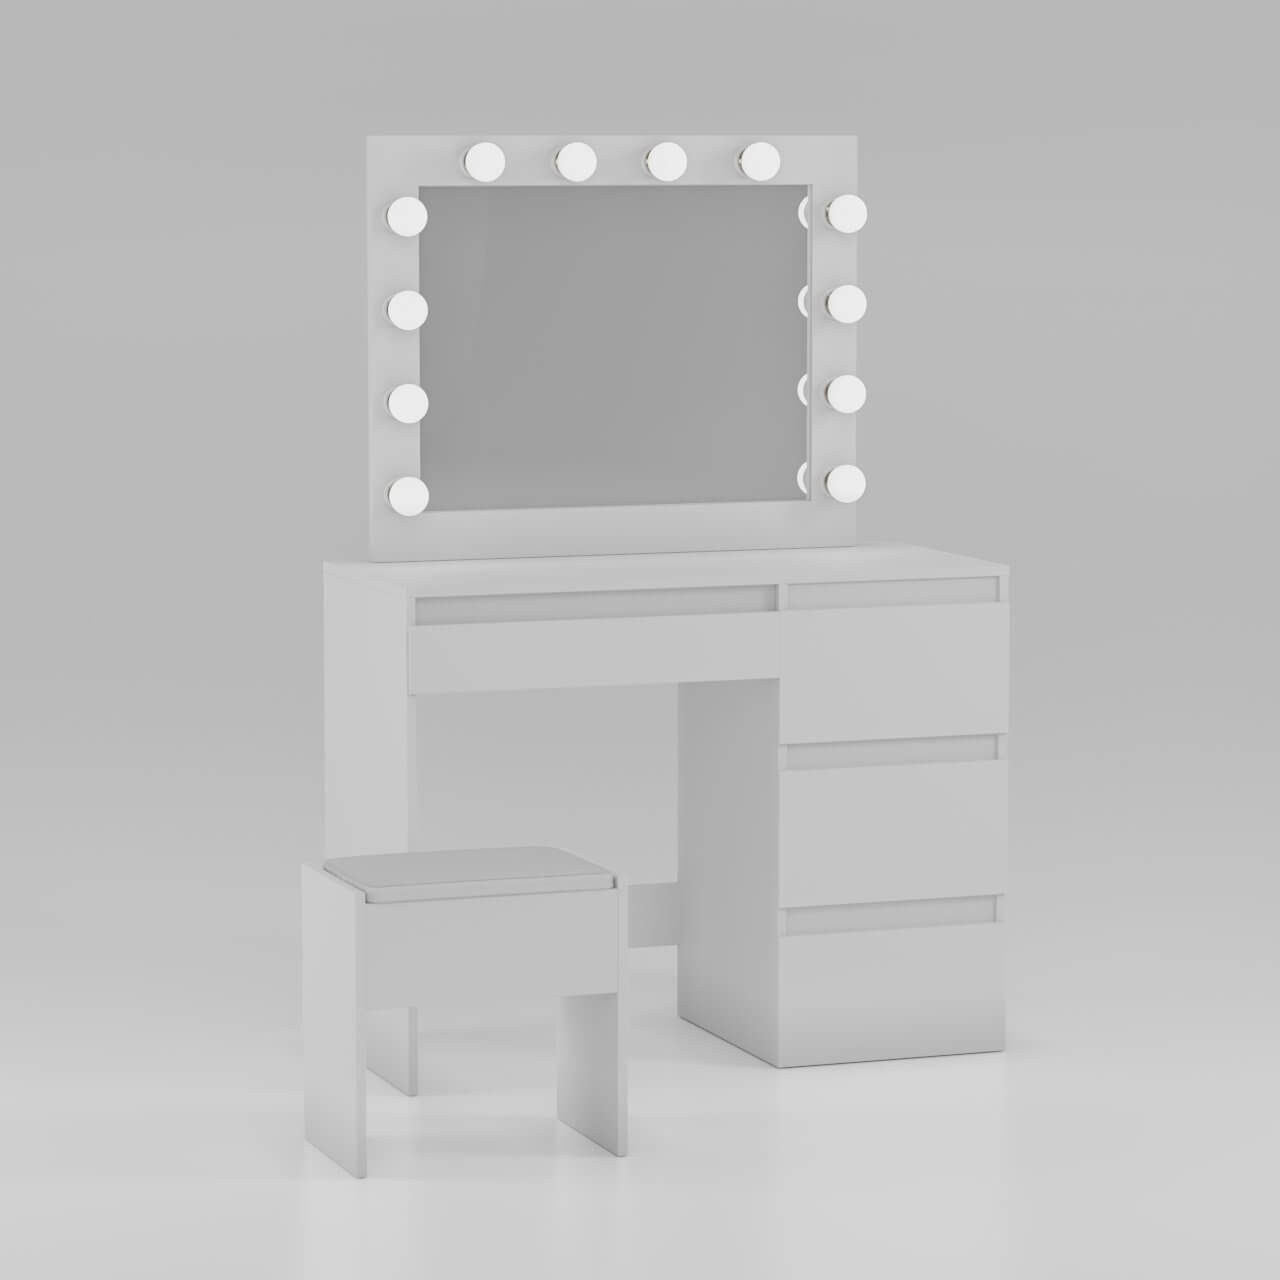 Best Seller White Hollywood Style Vanity Makeup Station With Stool And LED Lights